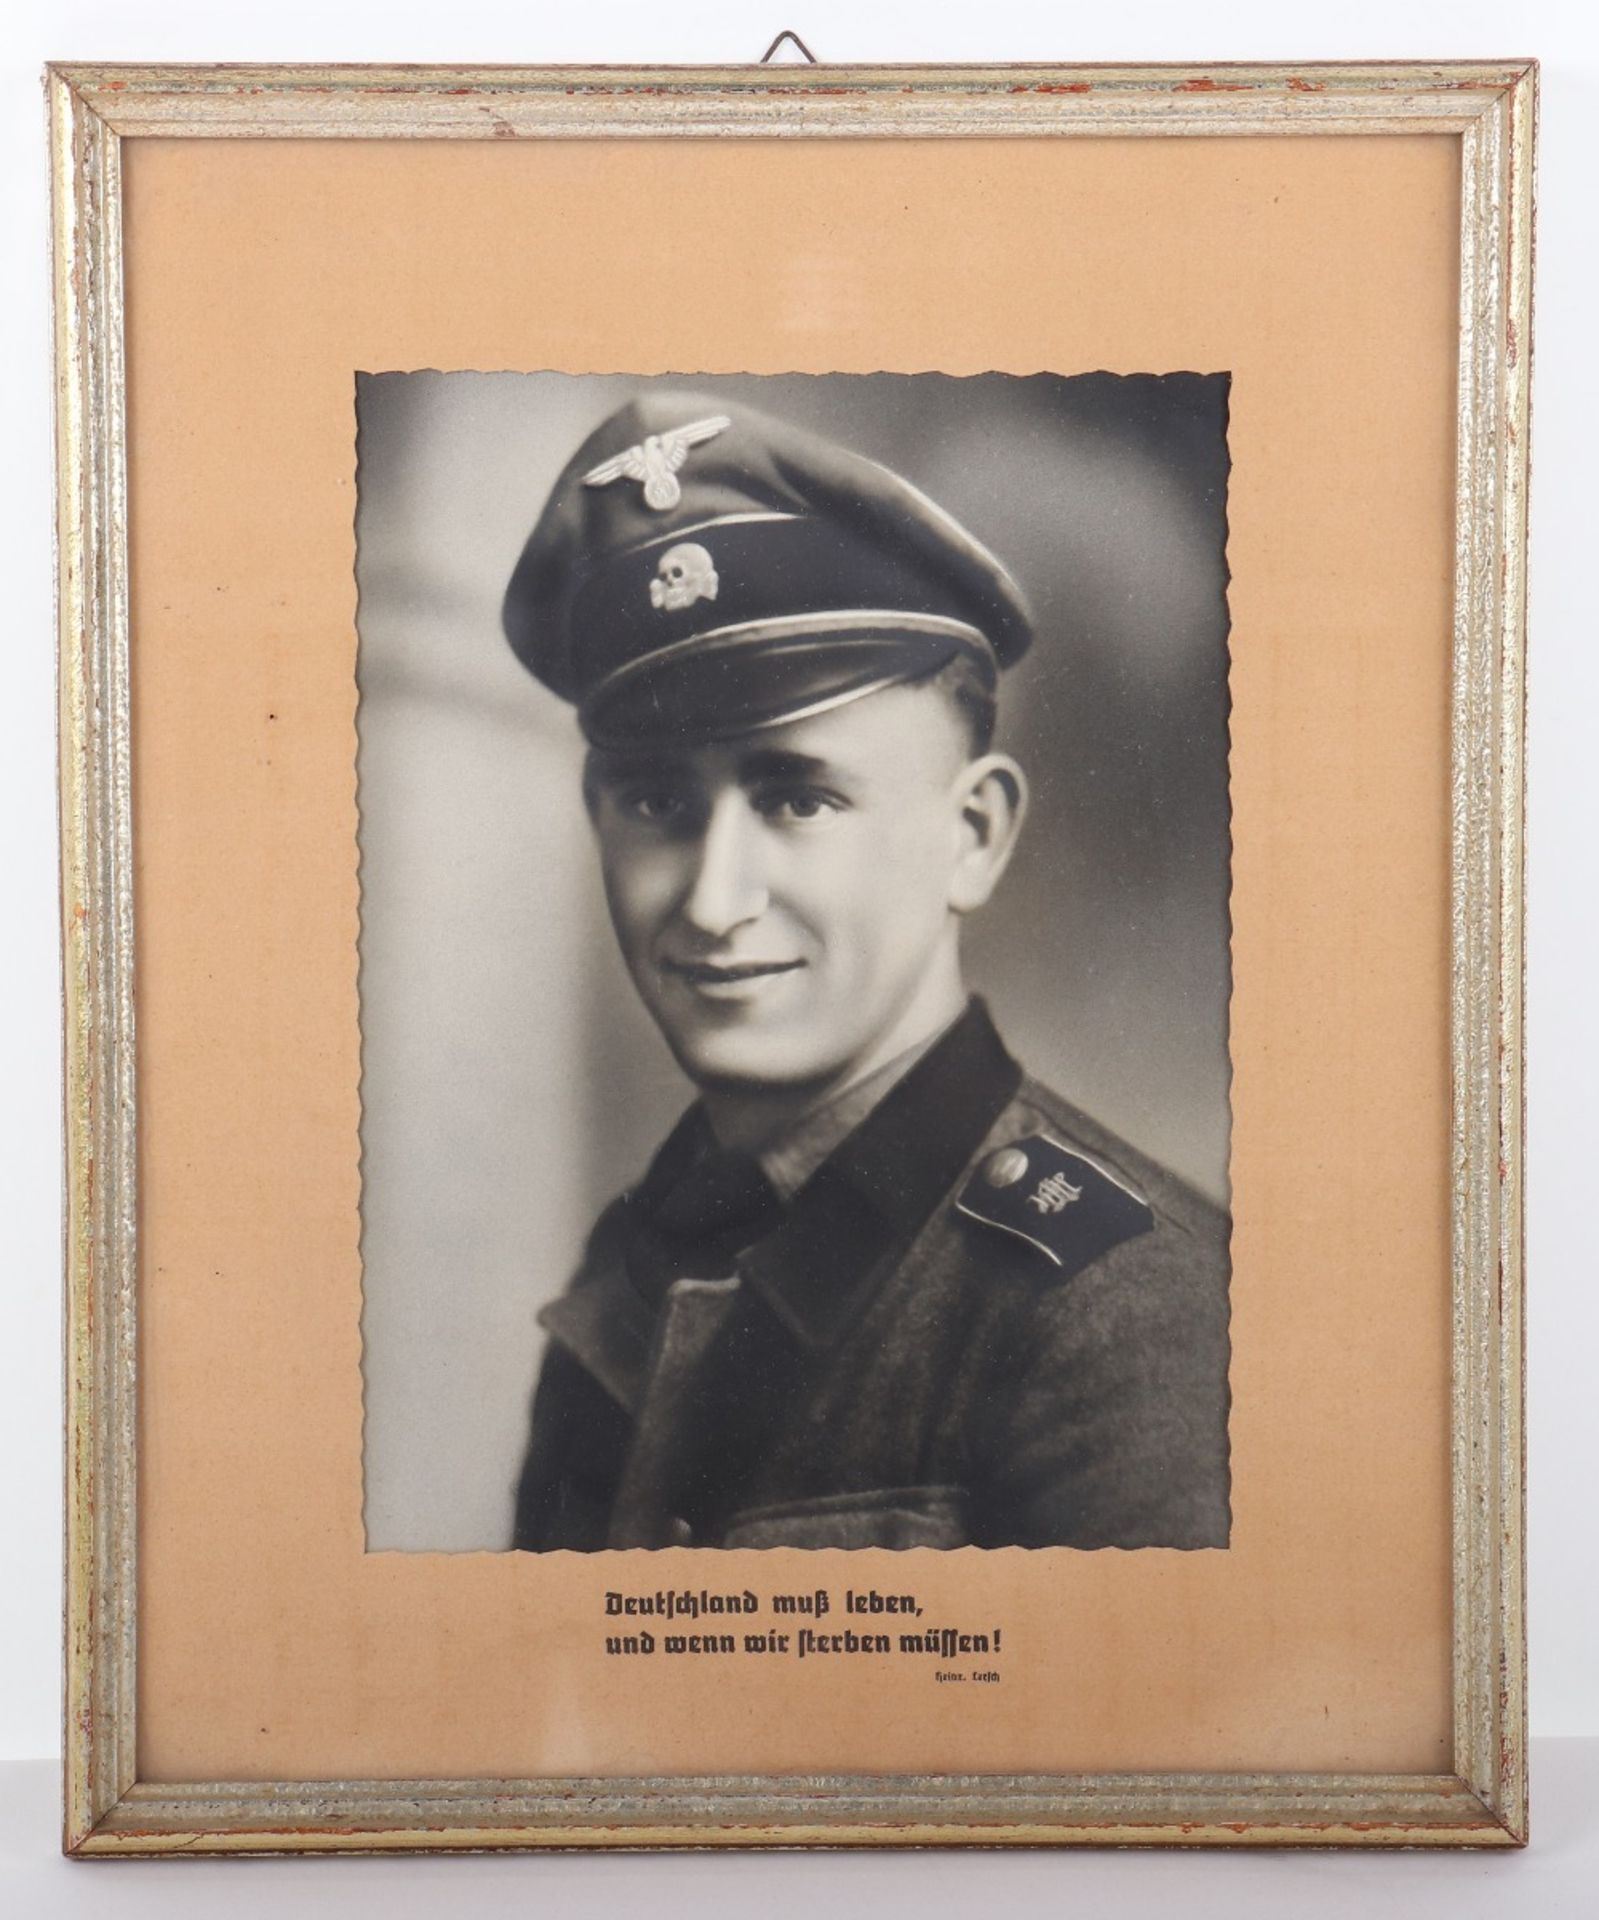 Waffen-SS Memorial Framed Photo to a Member of the 1st SS-Panzer Division SS-Leibstandarte Adolf Hit